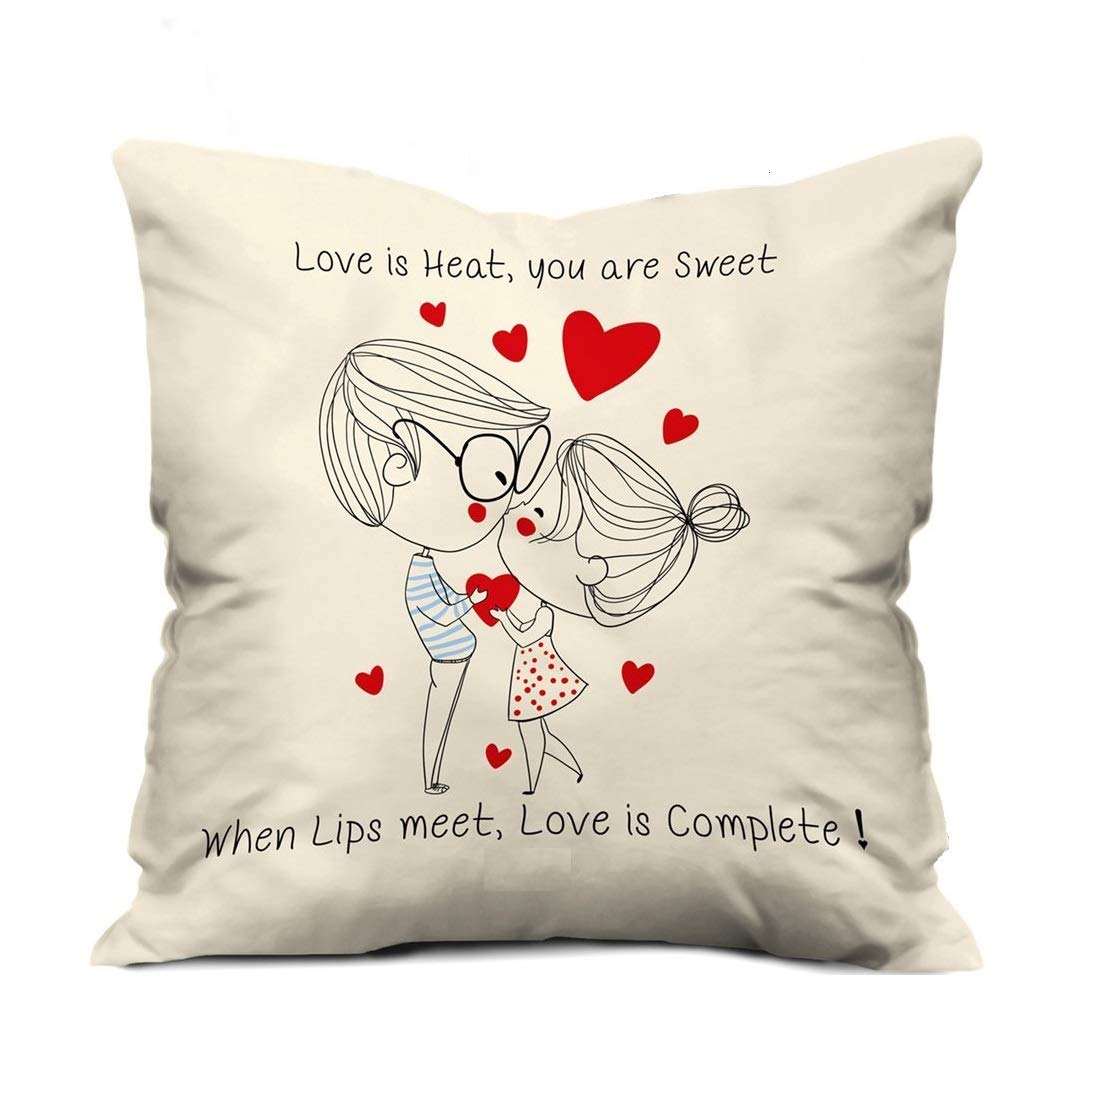 Cushion Cover: Satin Designer Decorative Anniversary/Valentines Day Love Gifting Heart Throw Pillow/Cushion Cover